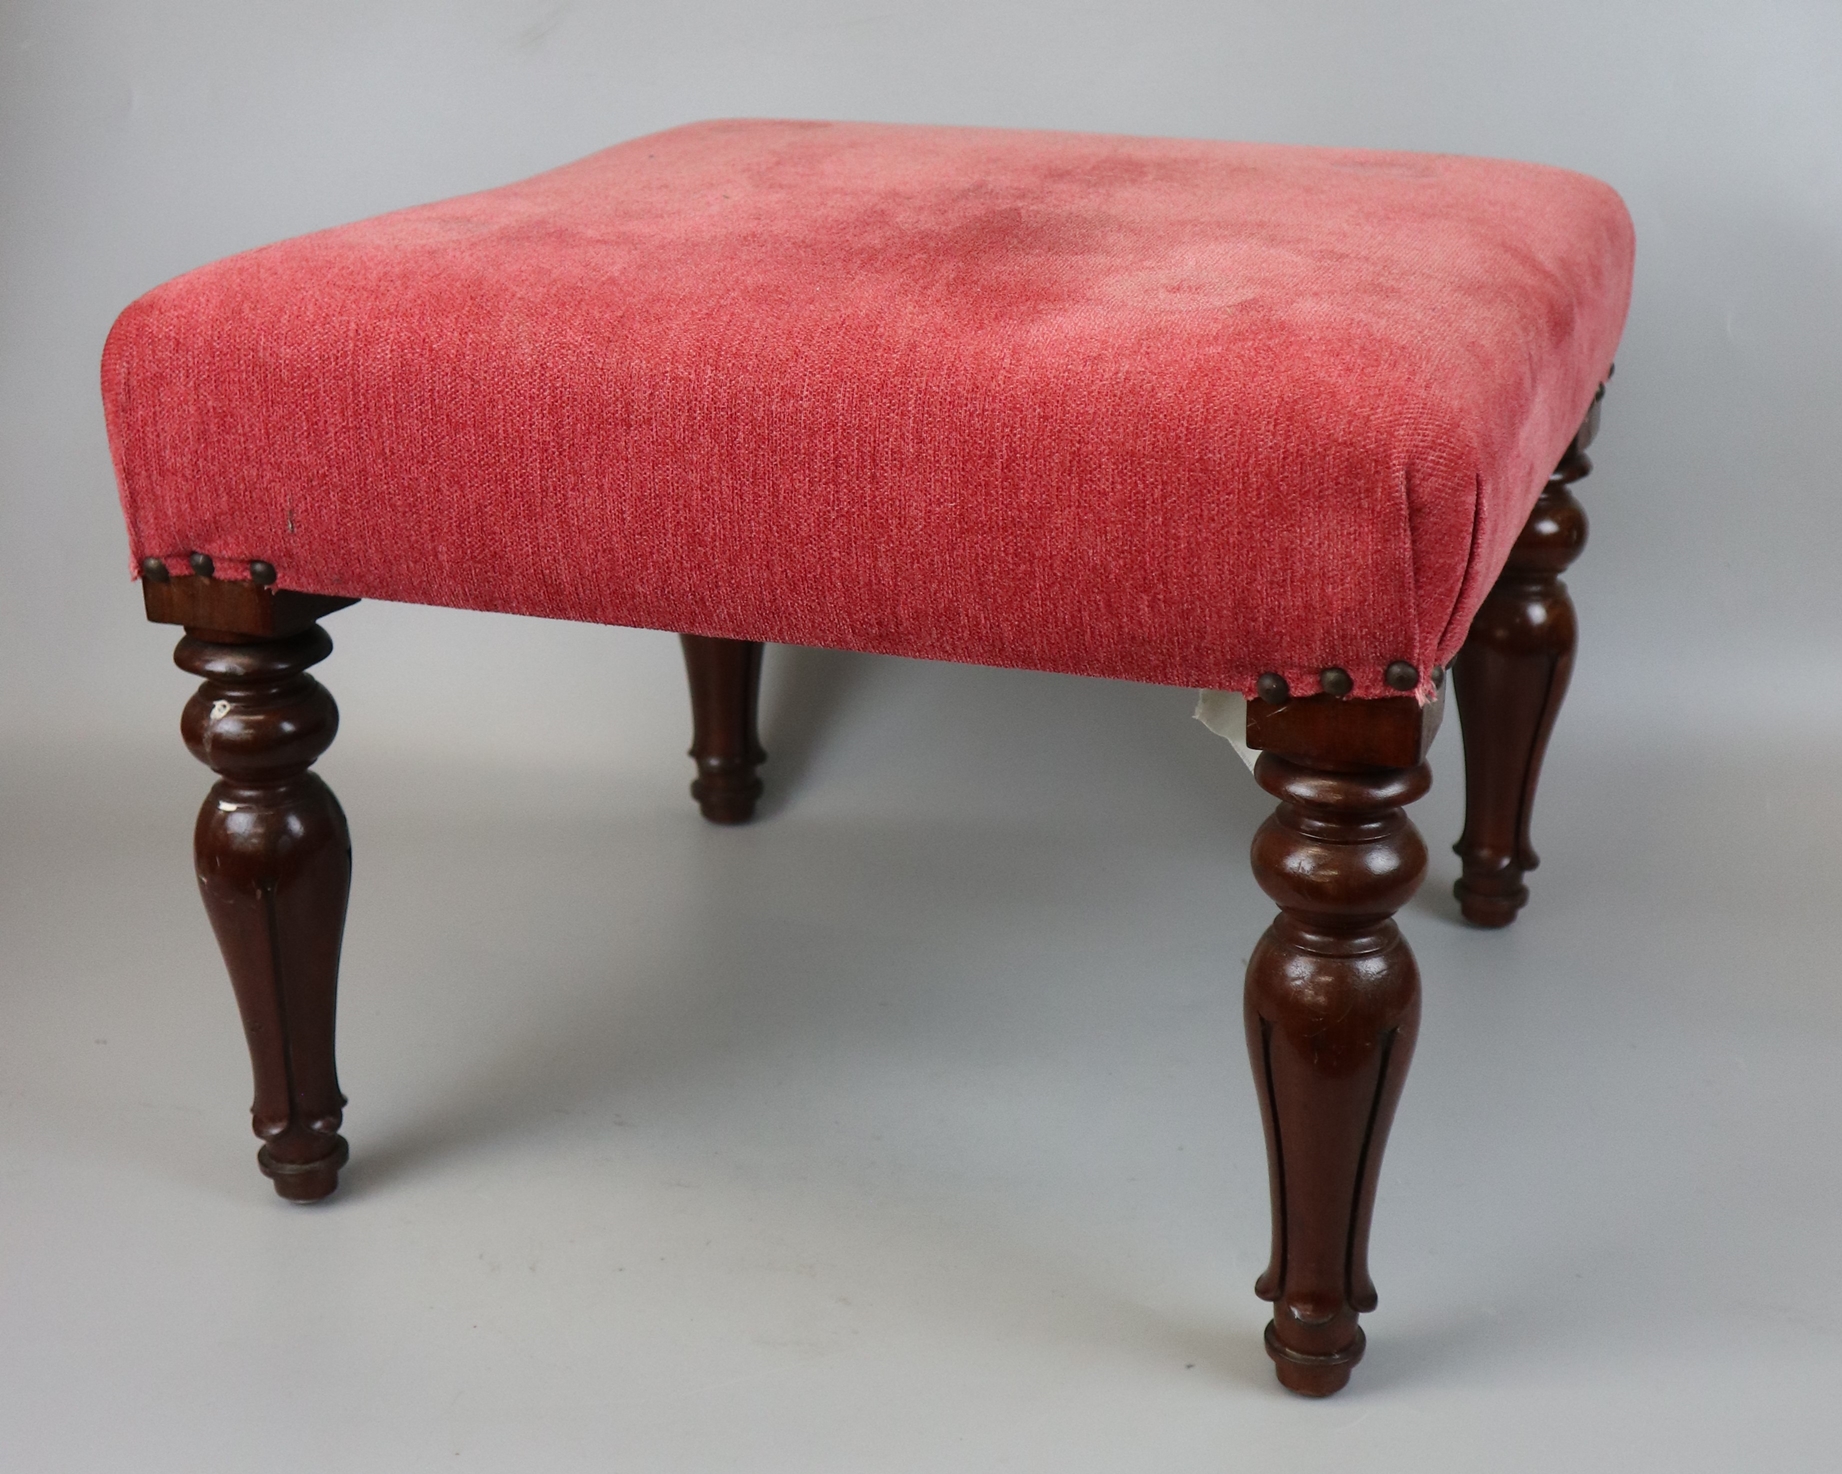 2 antique footstools - Image 2 of 3